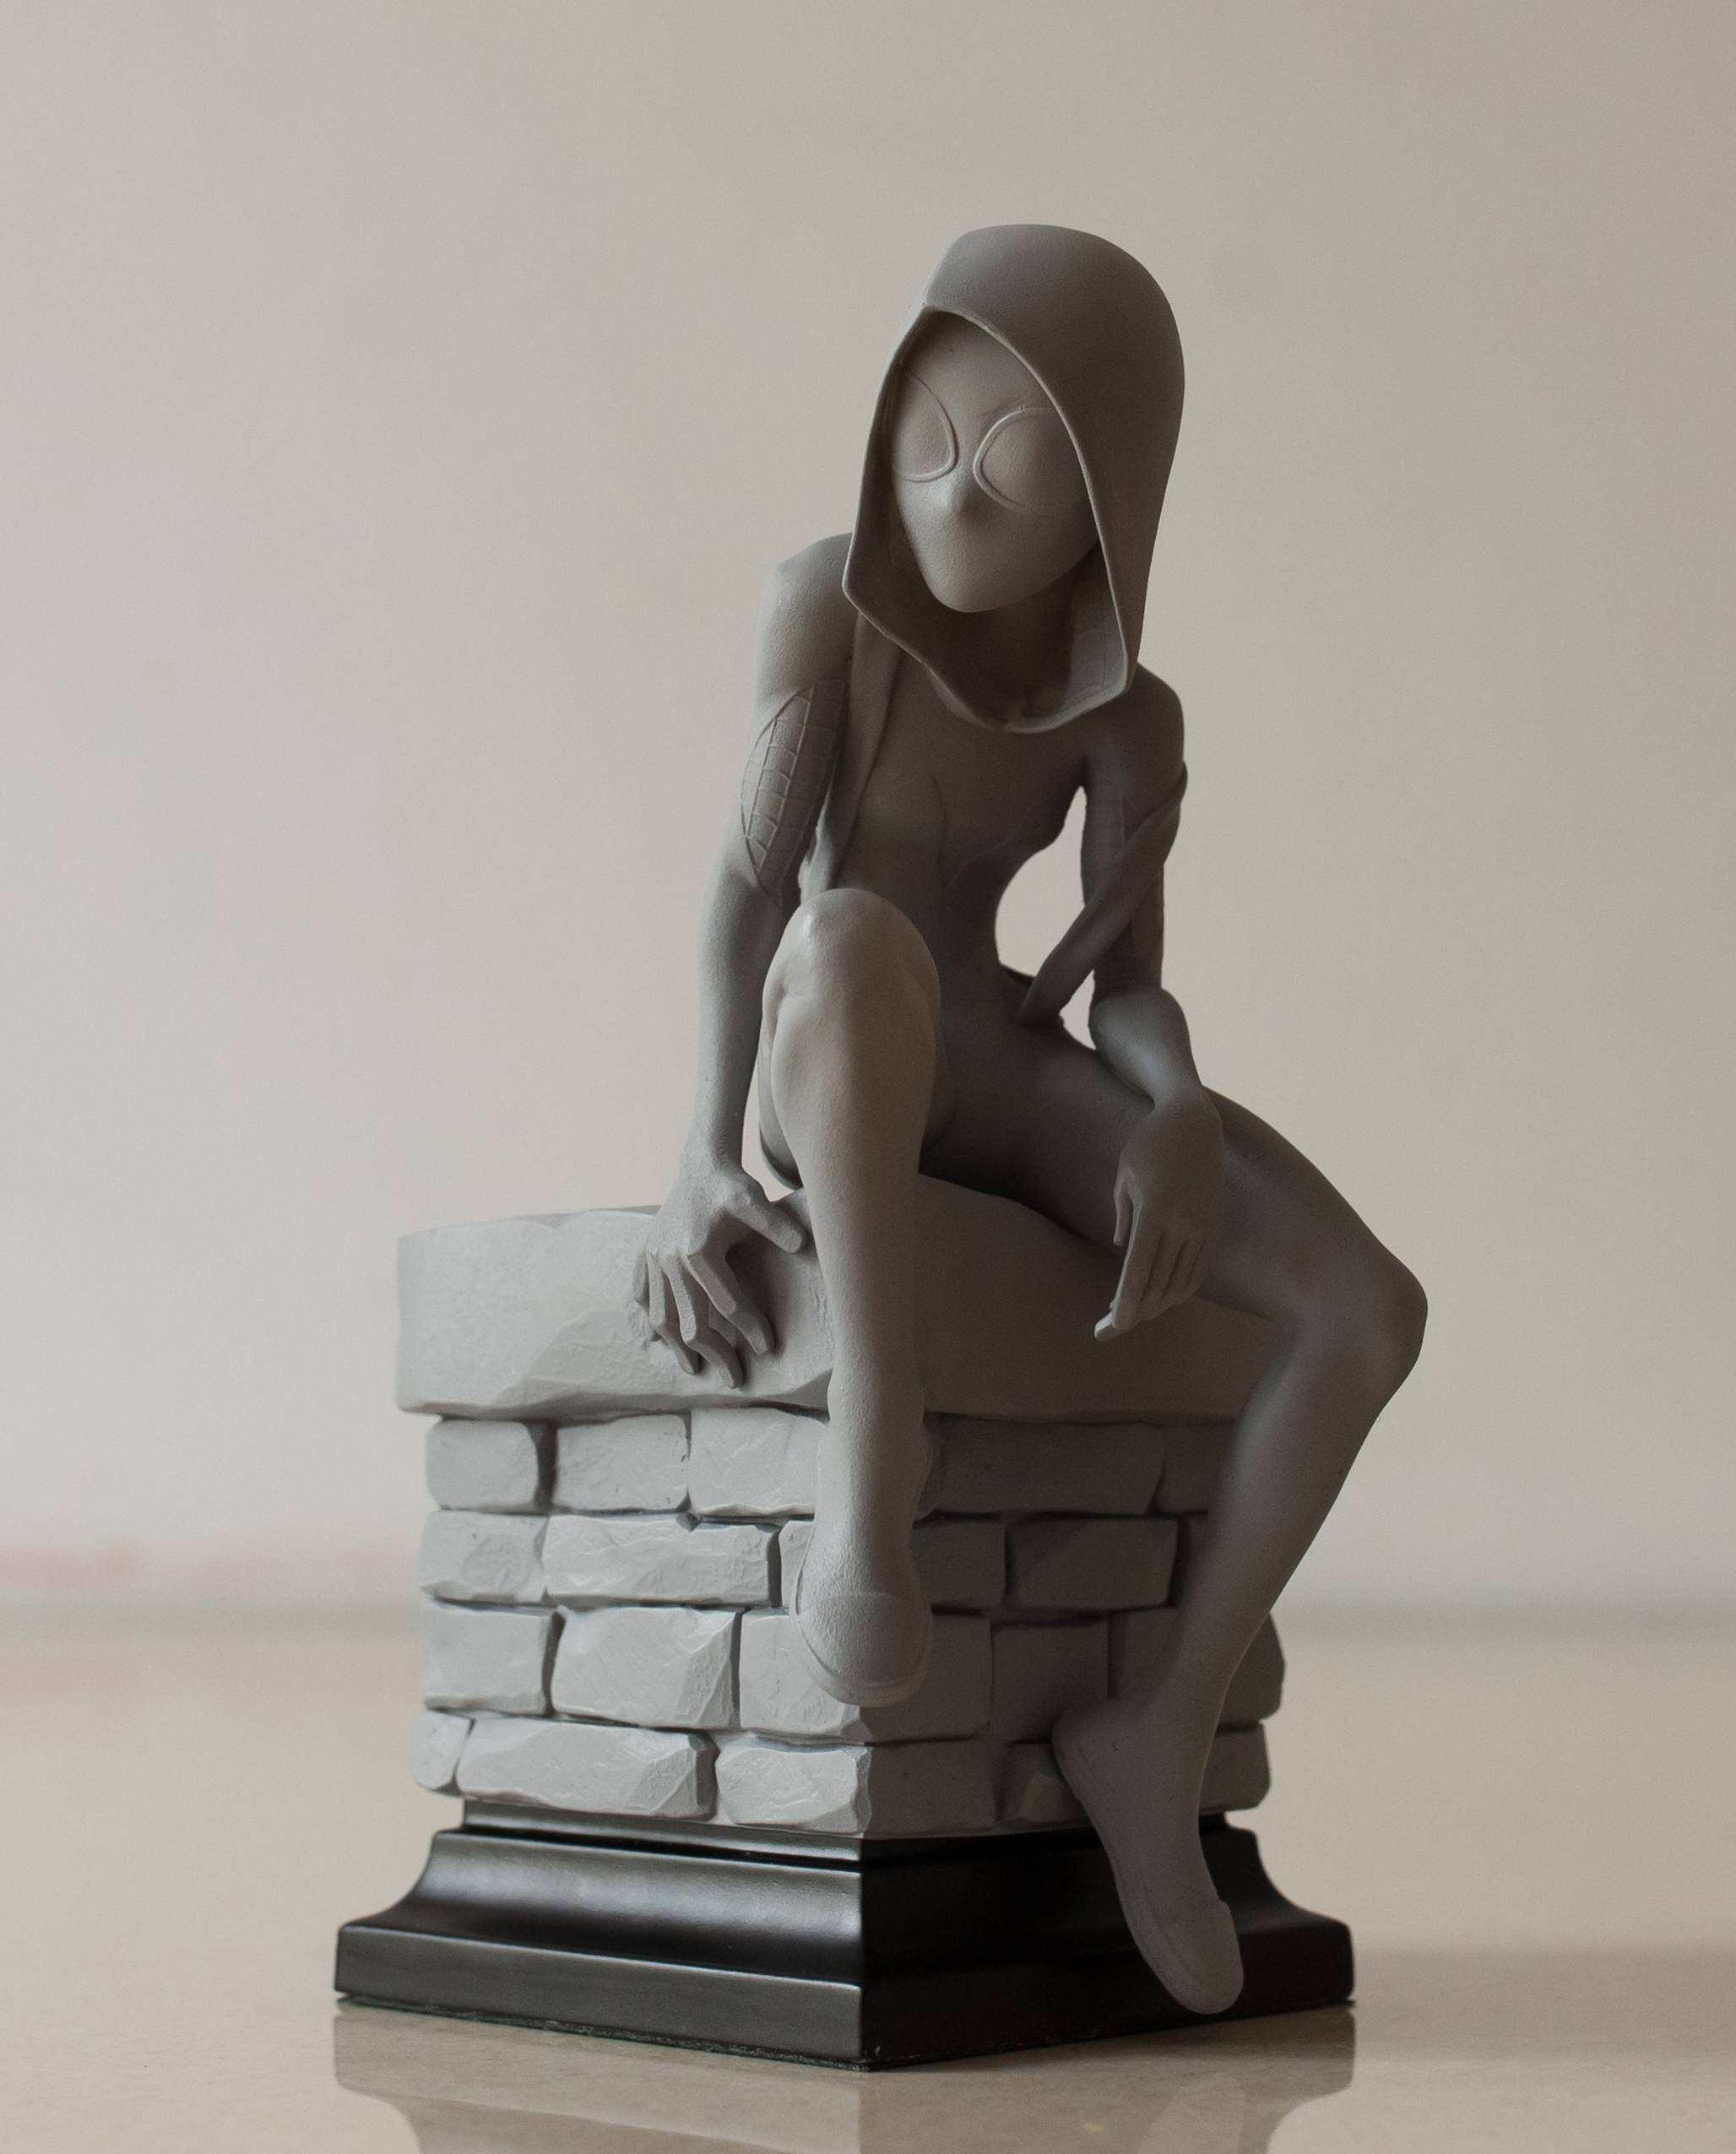 Spider-Gwen + Other Models Free 3D Print Files – 3D Printer Reviews - Free 3D Printable Models